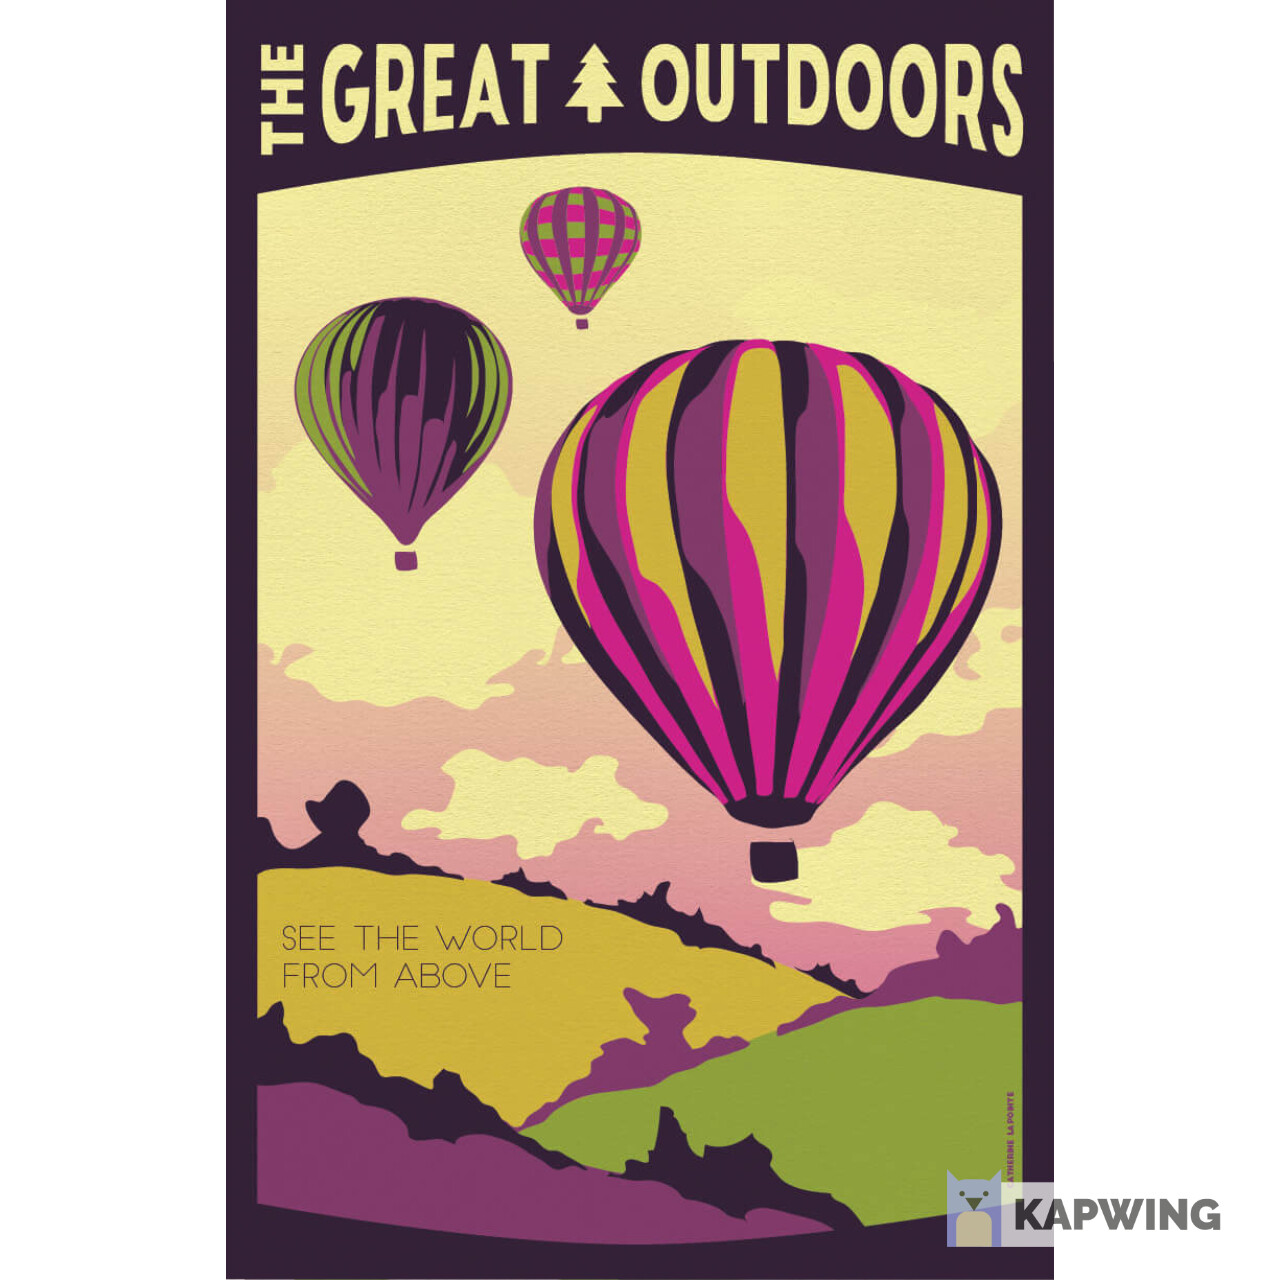 The Great Outdoors: Hot Air Balloon Vintage Travel Poster - 11x17"